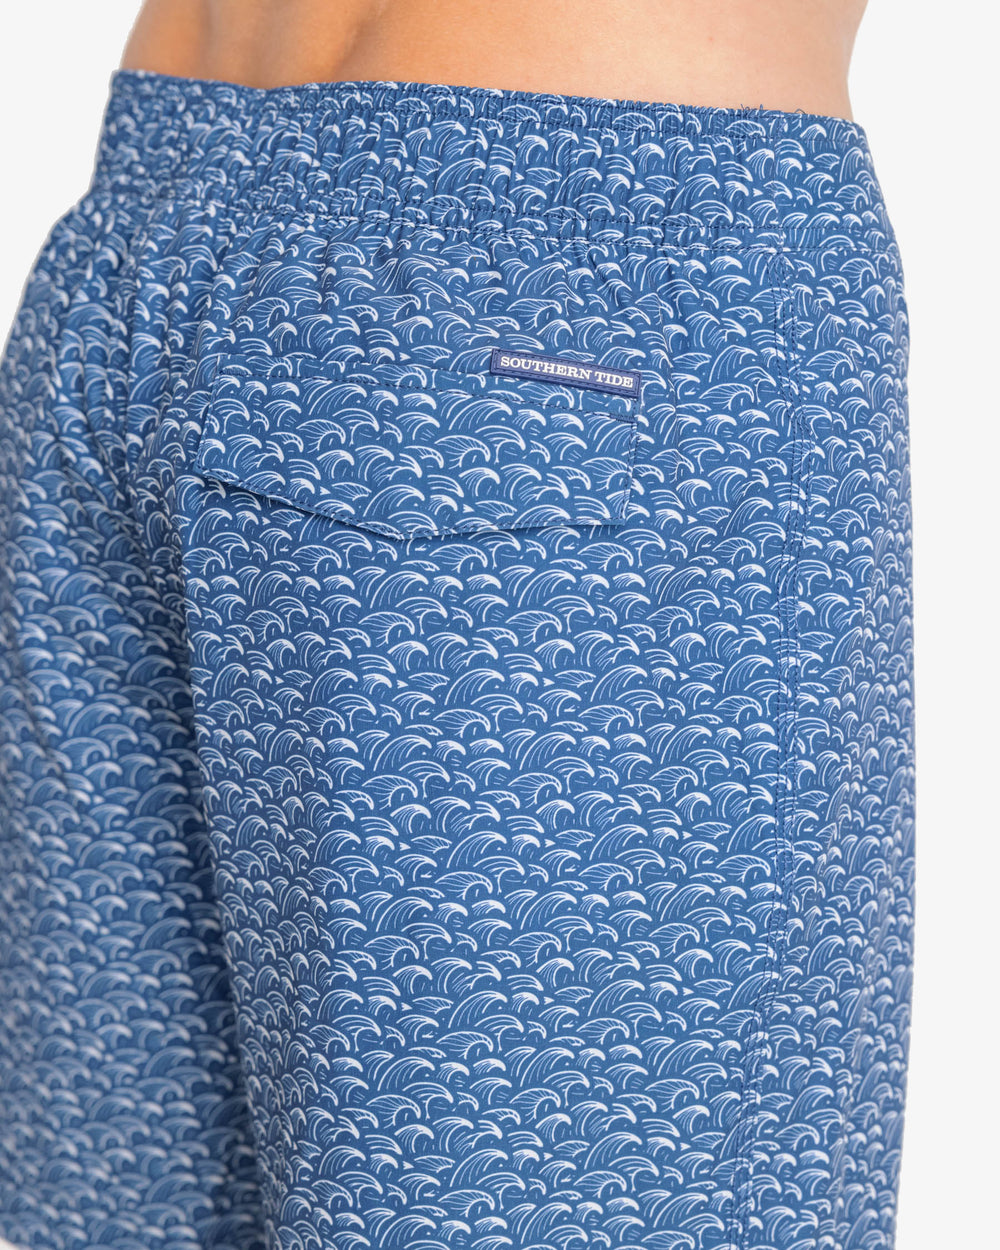 The detail view of the Southern Tide Araby Cove Swim Short by Southern Tide - Aged Denim